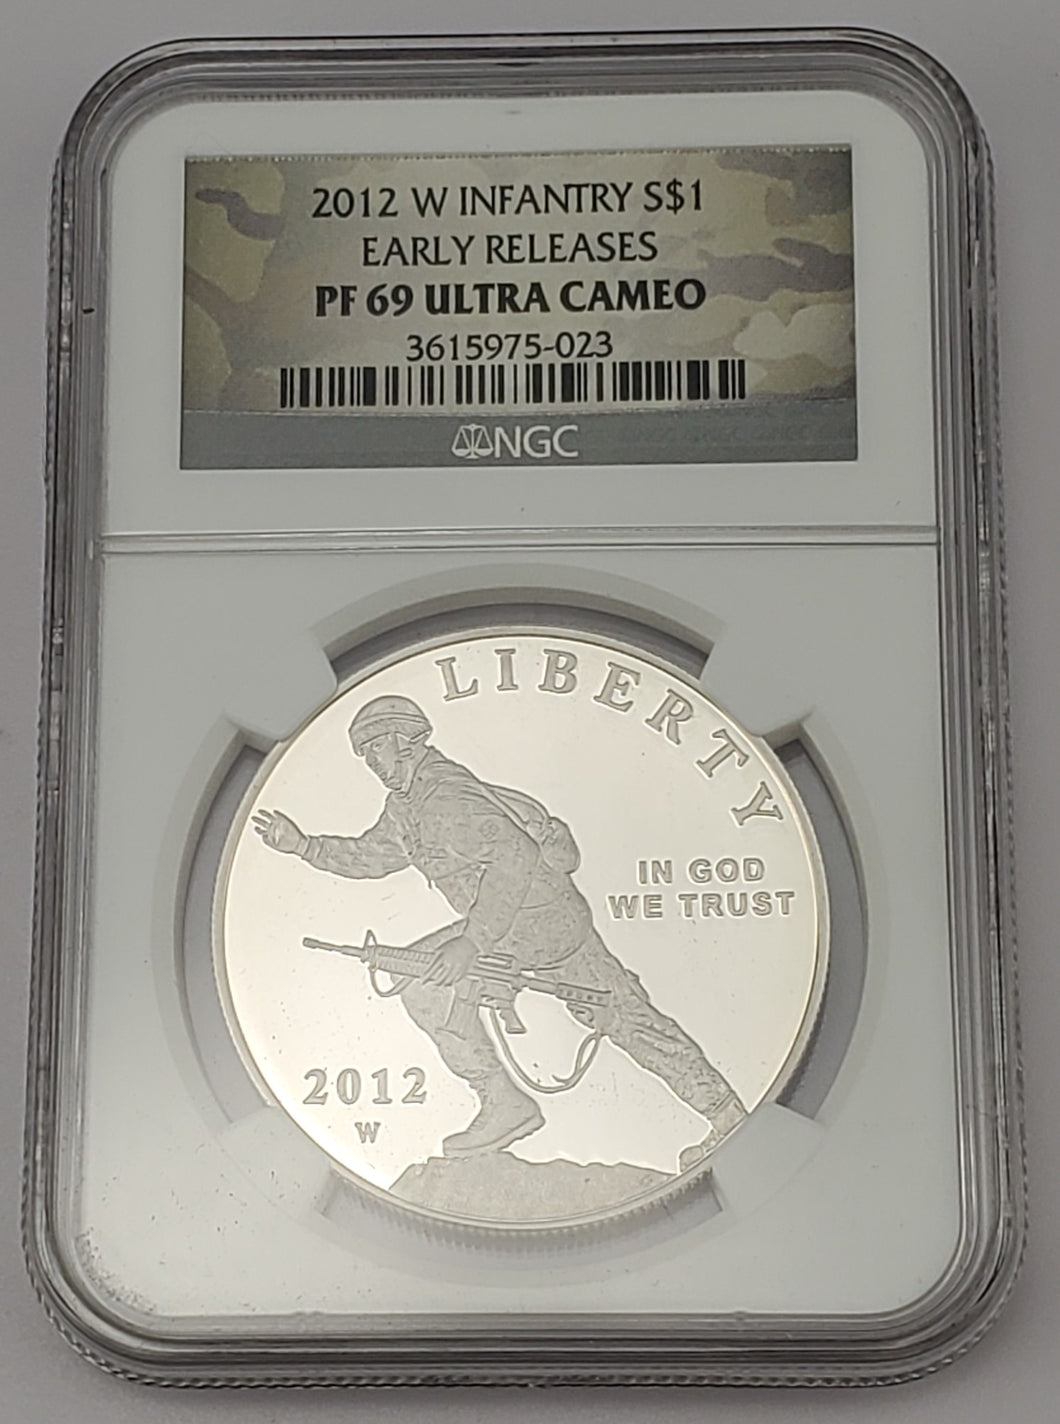 2012 W Infantry Silver Dollar $1 Early Releases PF 69 Ultra Cameo NGC